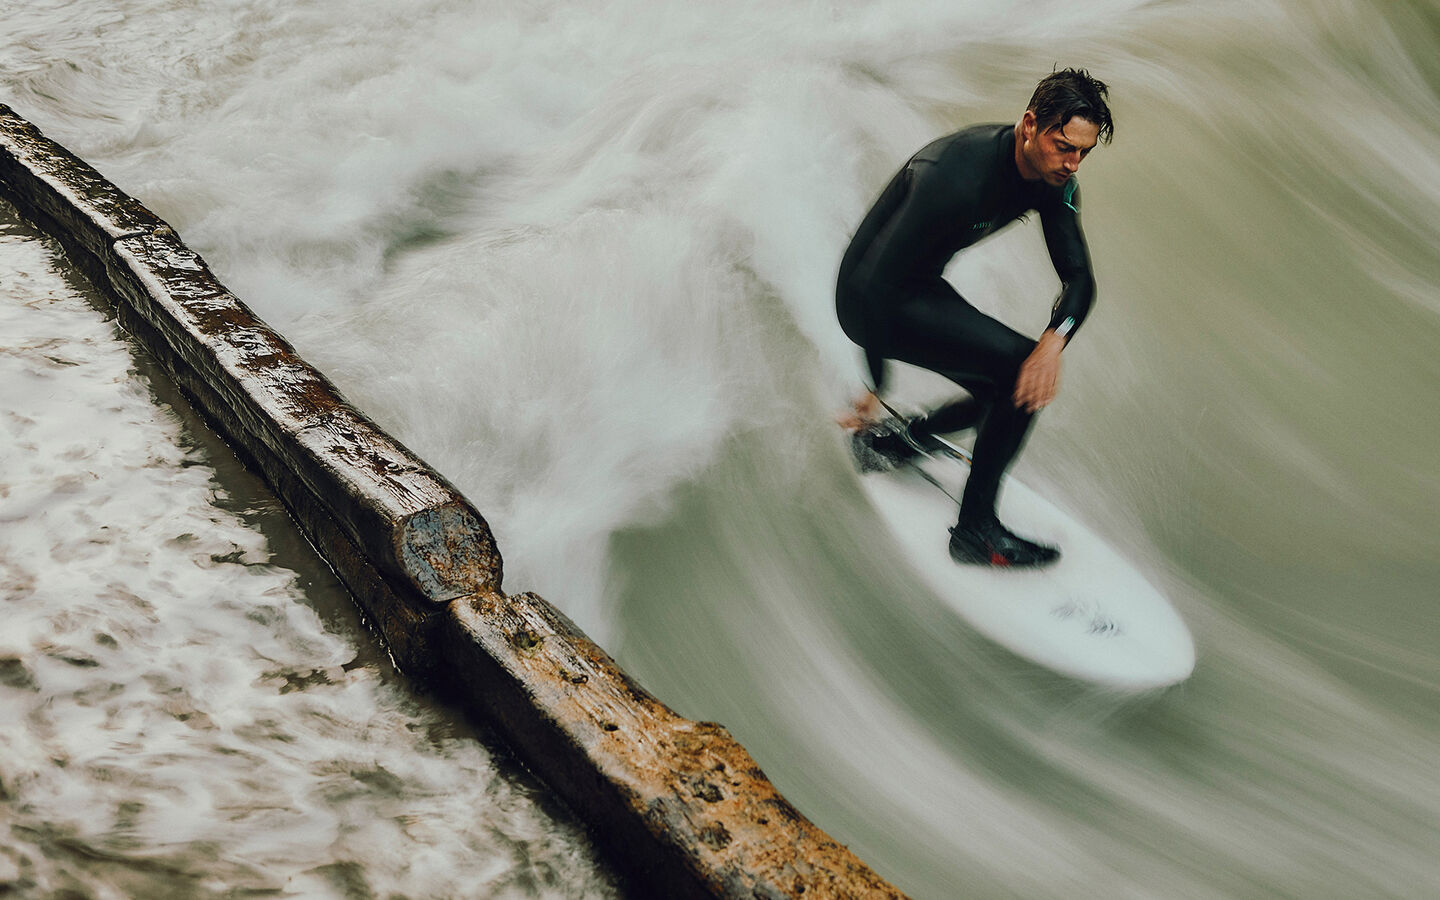 Sebastian Kuhn stands on his surfboard and river surfs at the Eisbach